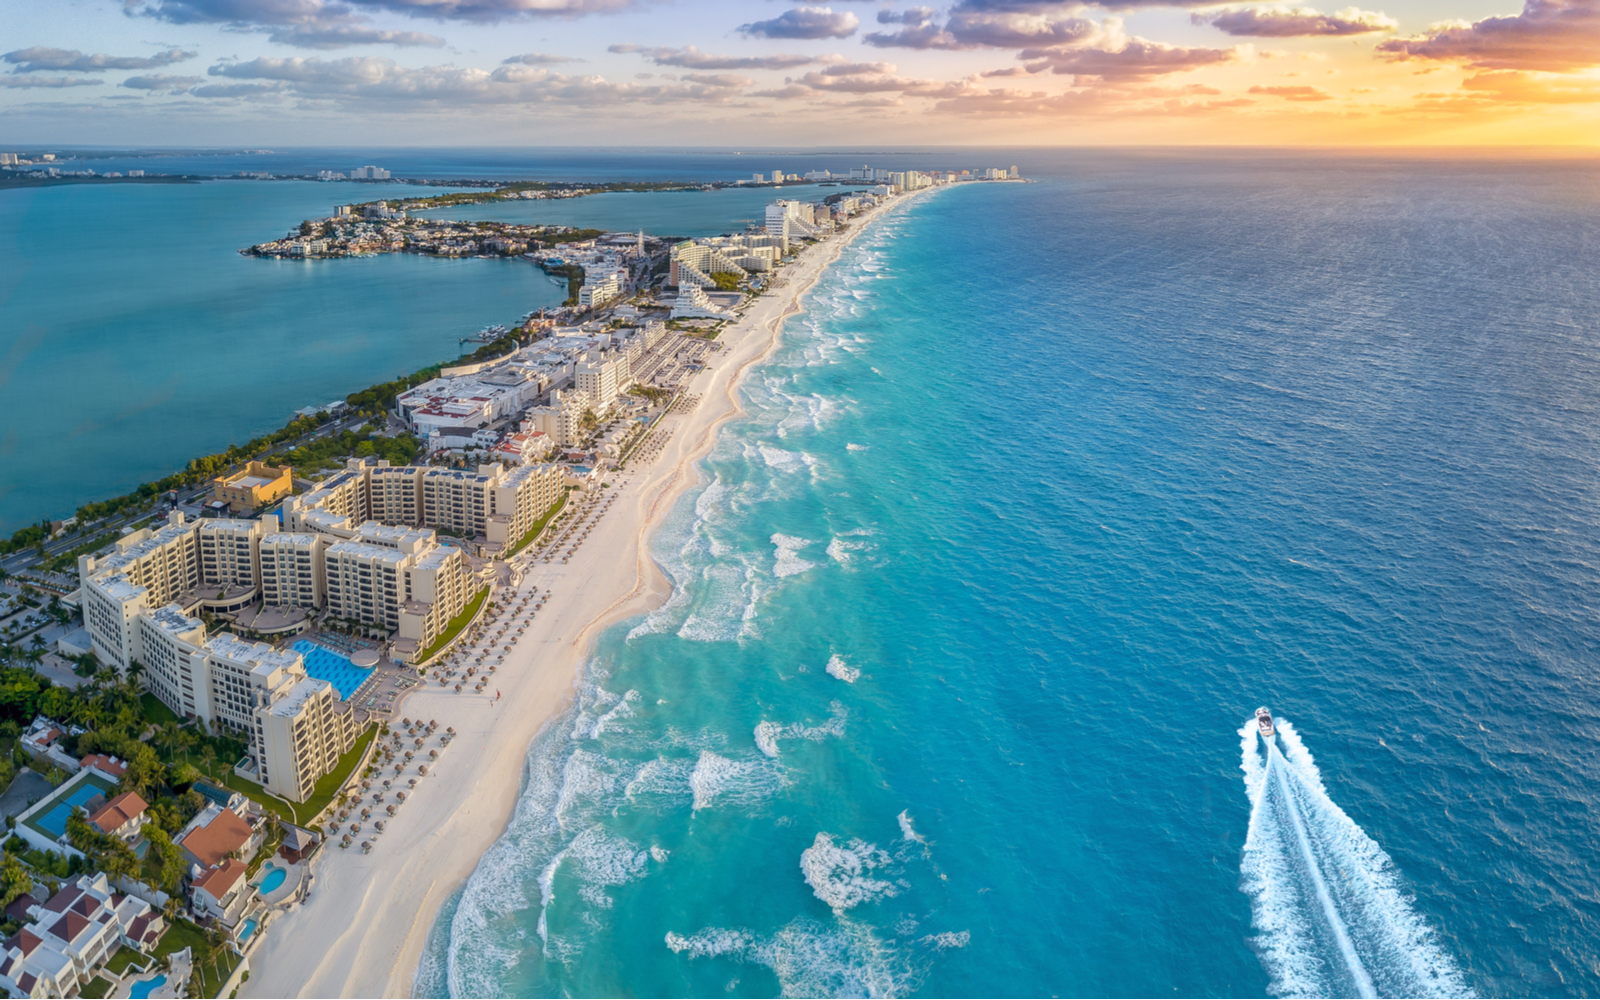 15 Best Things to Do in Cancun in 2022